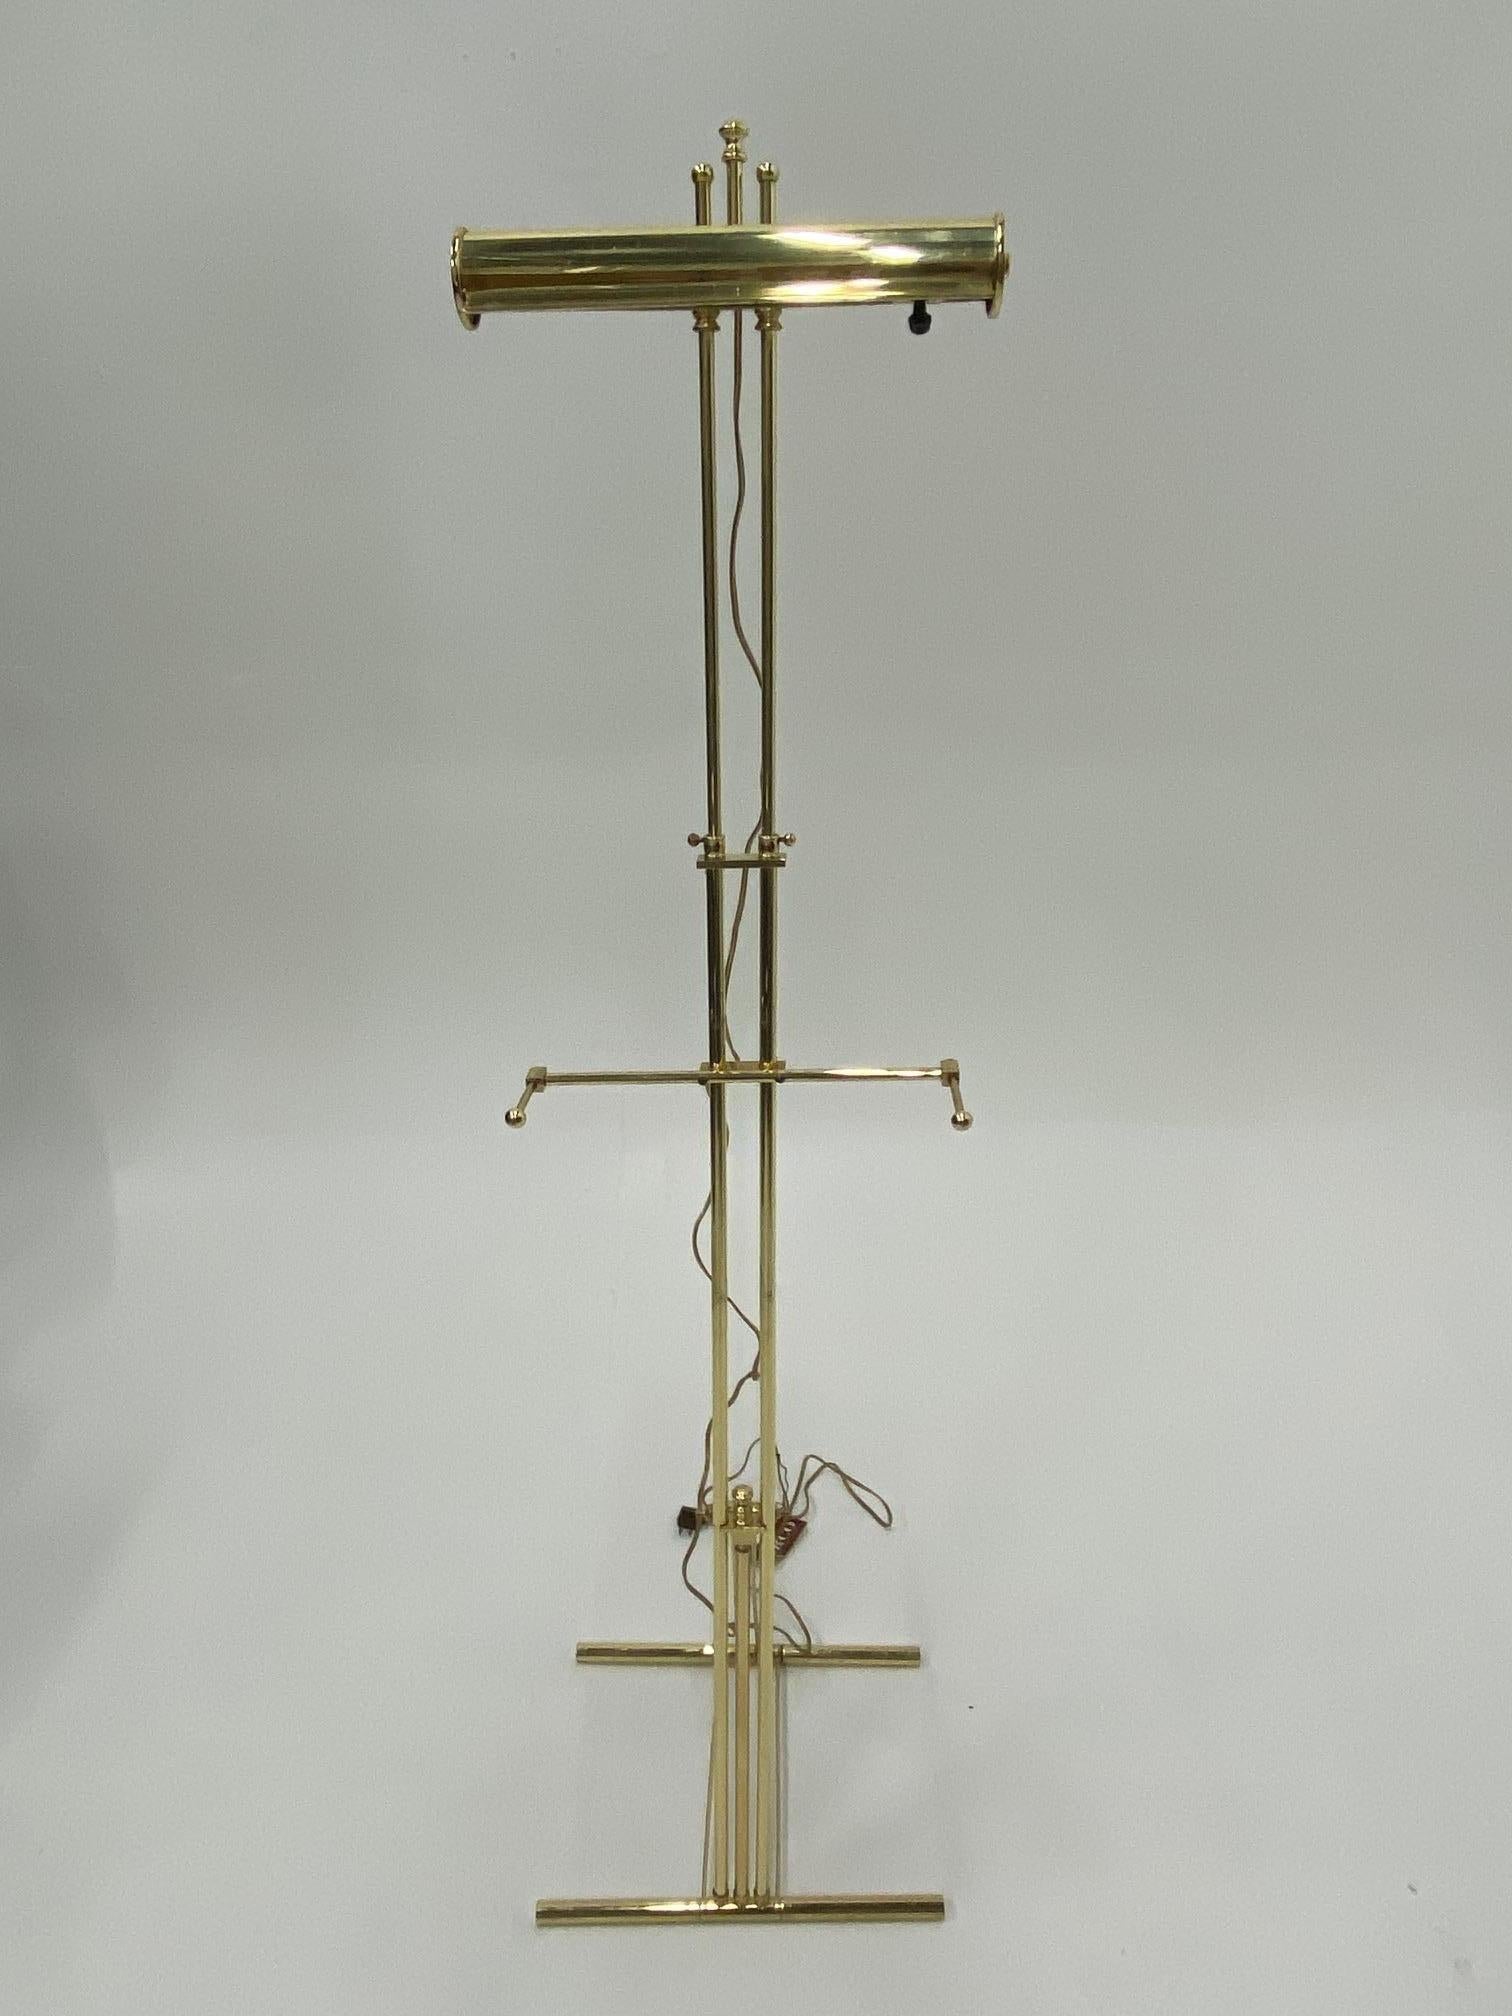 Stunning solid brass adjustable easel with picture light by Herco Lighting, a division of Reed & Barton, a superior designer of brass lighting since 1924. High gloss brass with high baked lacquer.